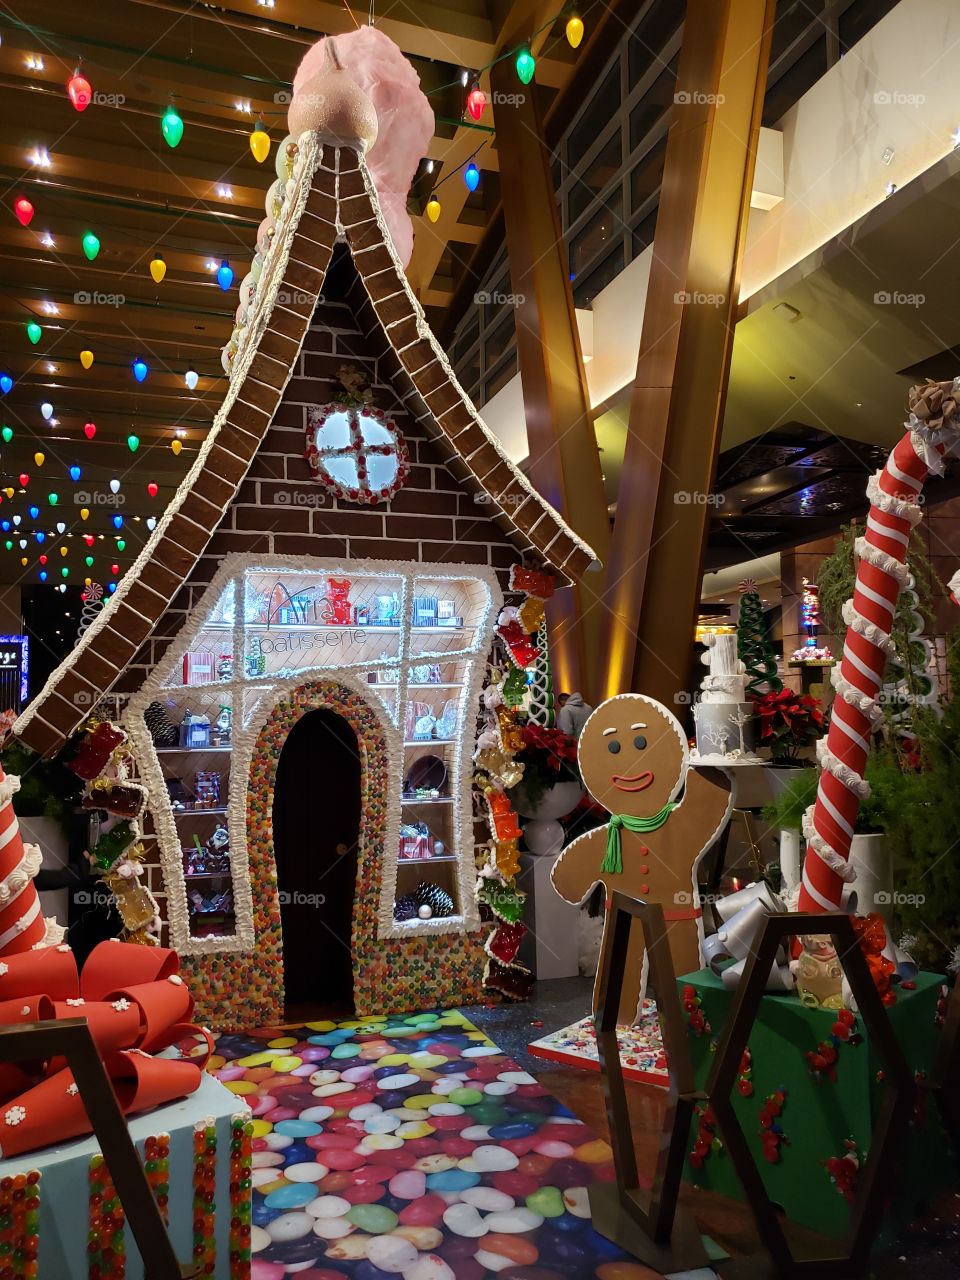 Worlds Largest Gingerbread House at Aria Casino Las Vegas NV